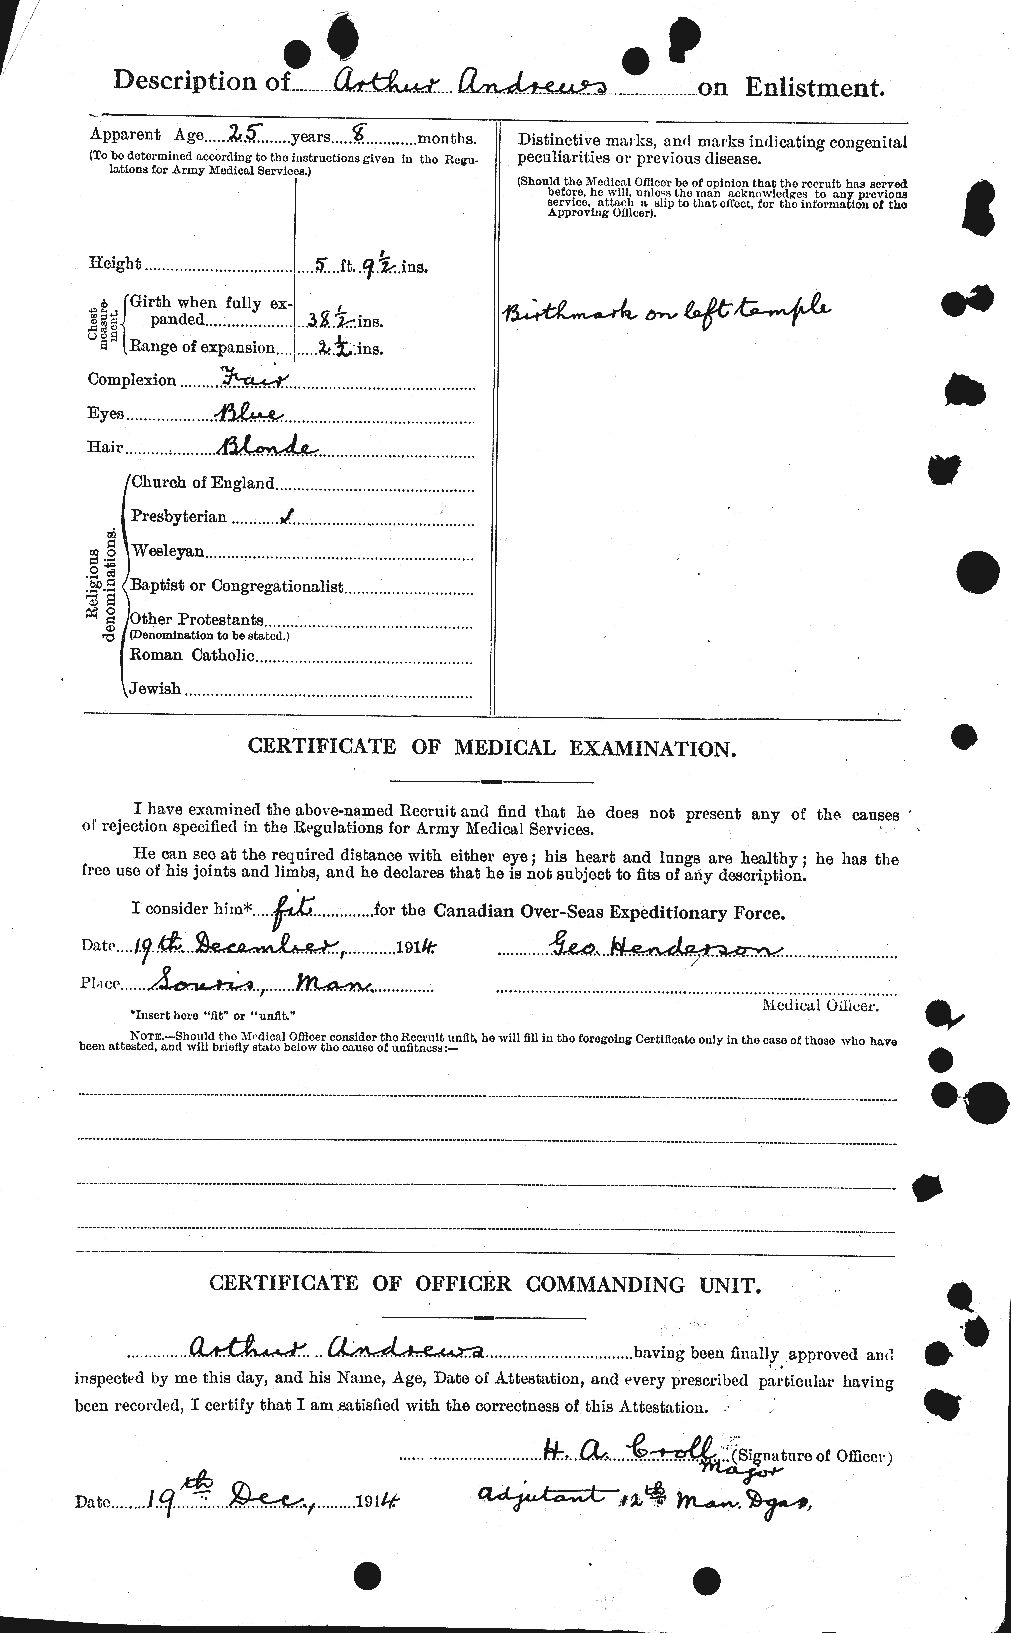 Personnel Records of the First World War - CEF 210436b